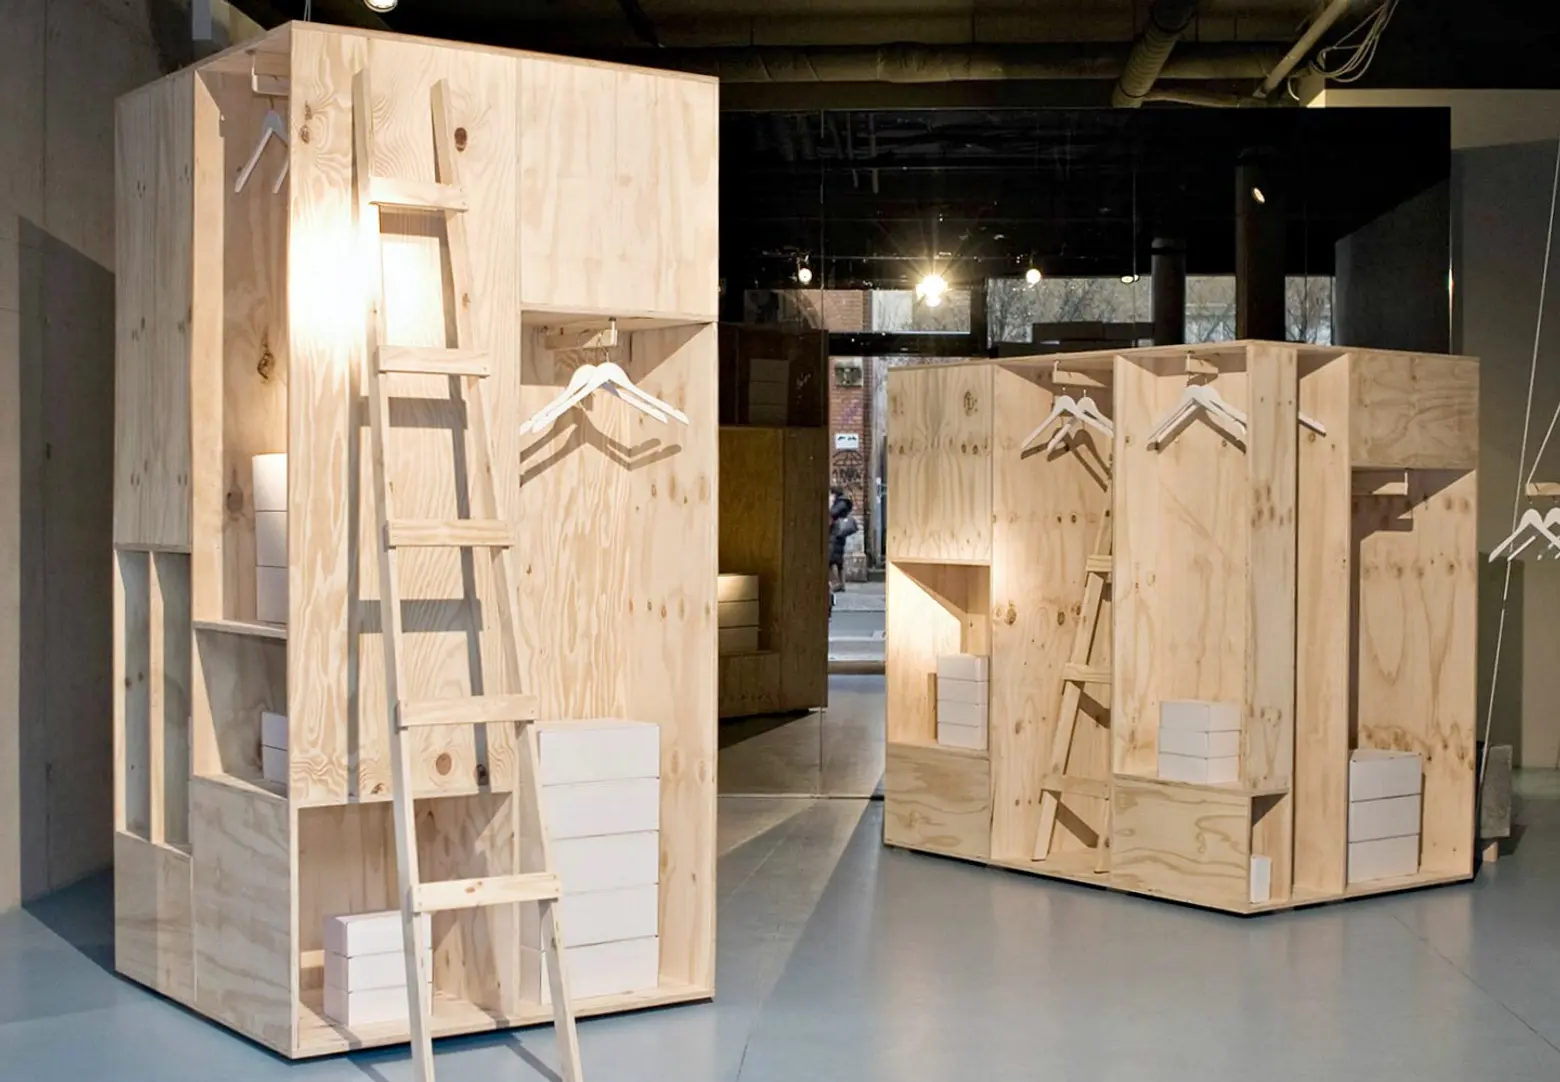 Shipping Crates Inspired These Simple Wooden Wardrobes By Sigurd Larsen